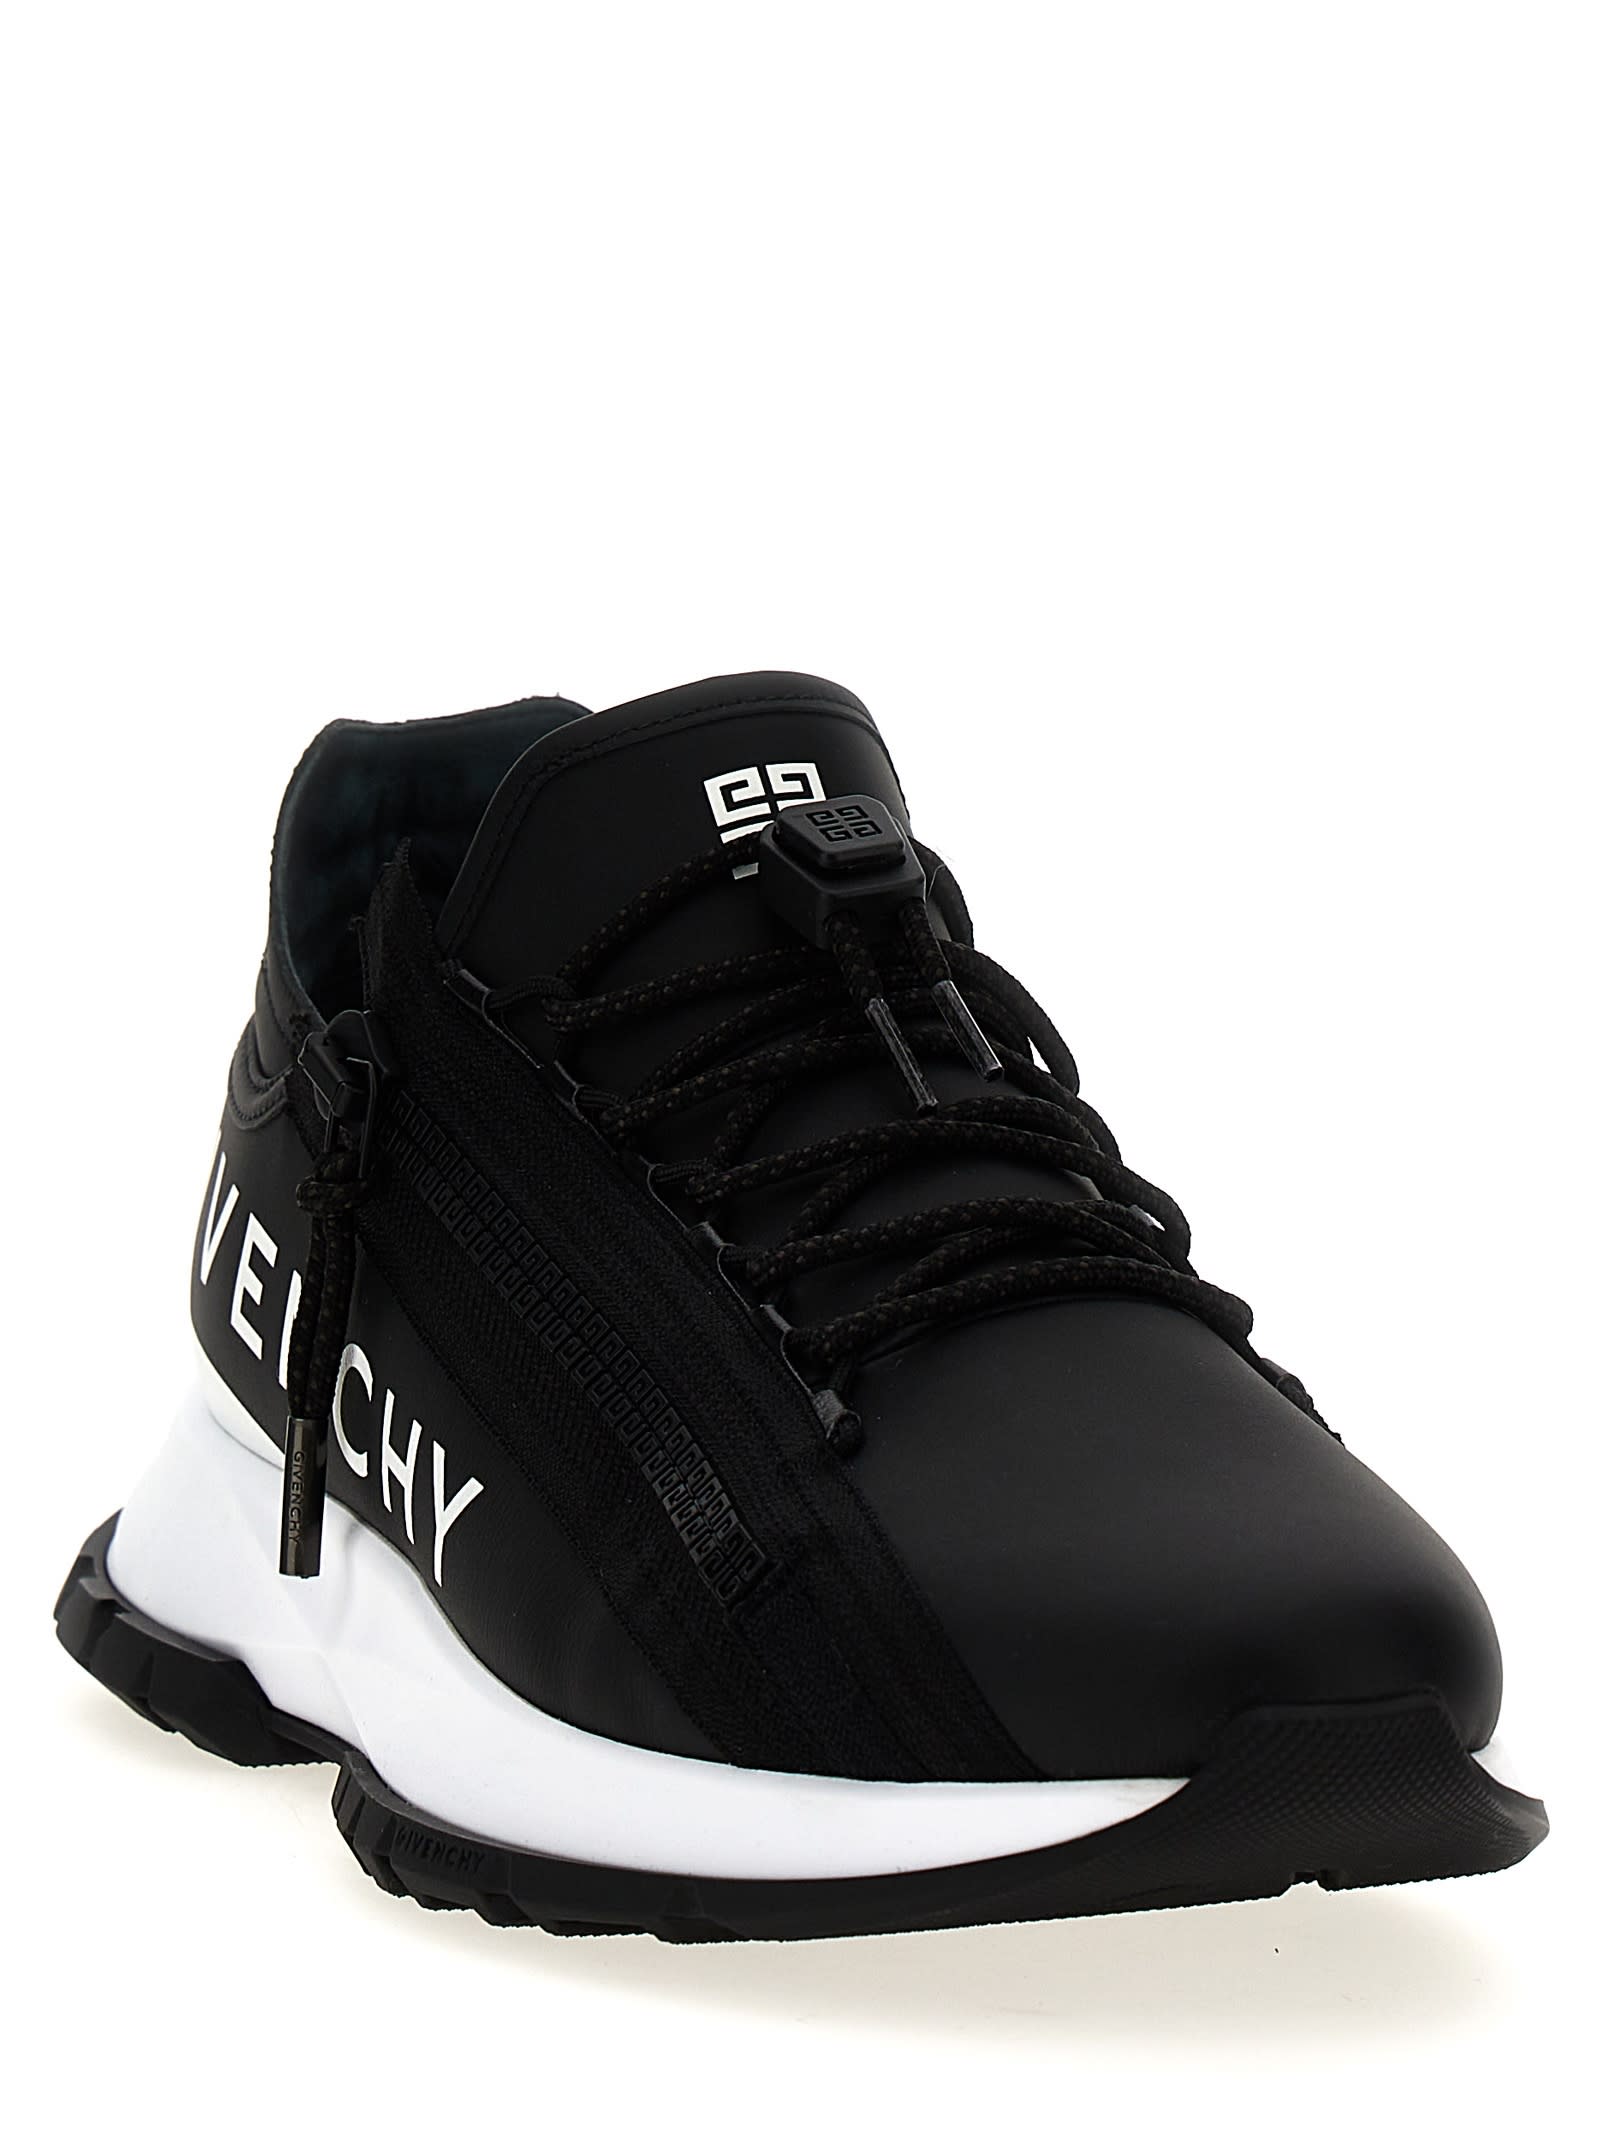 Shop Givenchy Spectre Sneakers In White/black